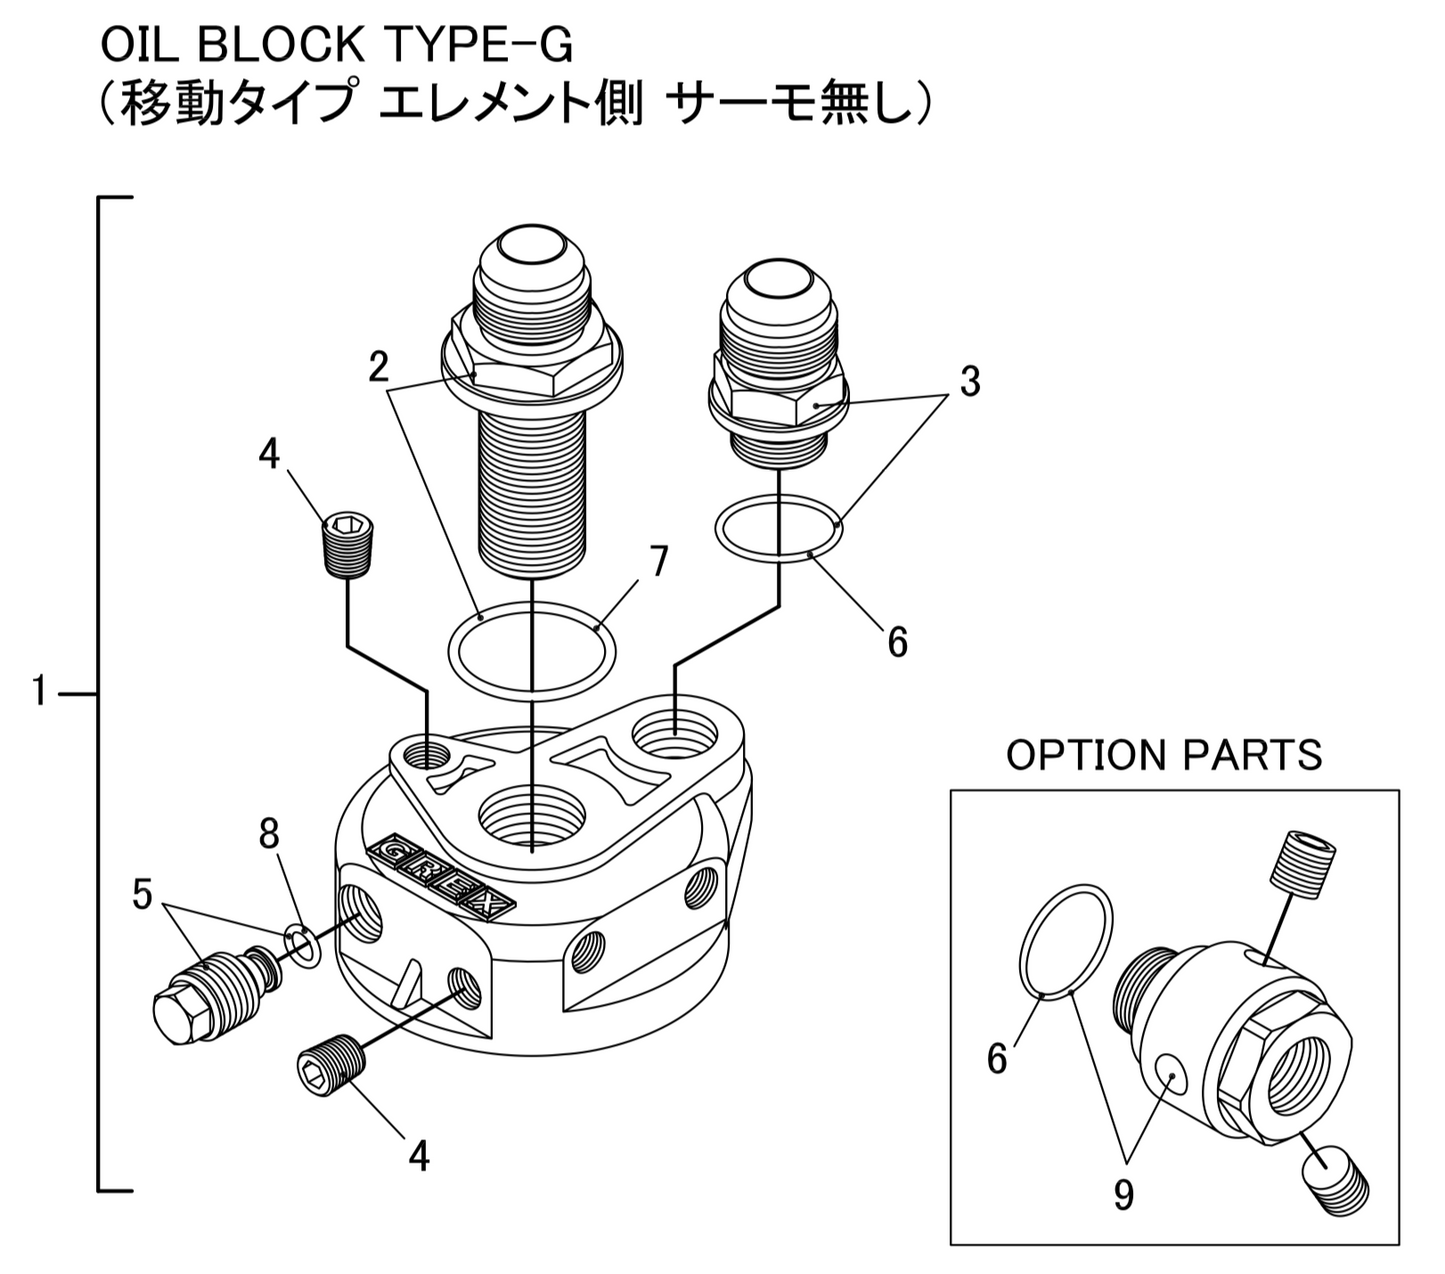 GReddy TRUST Japan OIL BLOCK TYPE-G (MU MOVEMENT TYPE ELEMENT SIDE THERMO) FOR 12401139